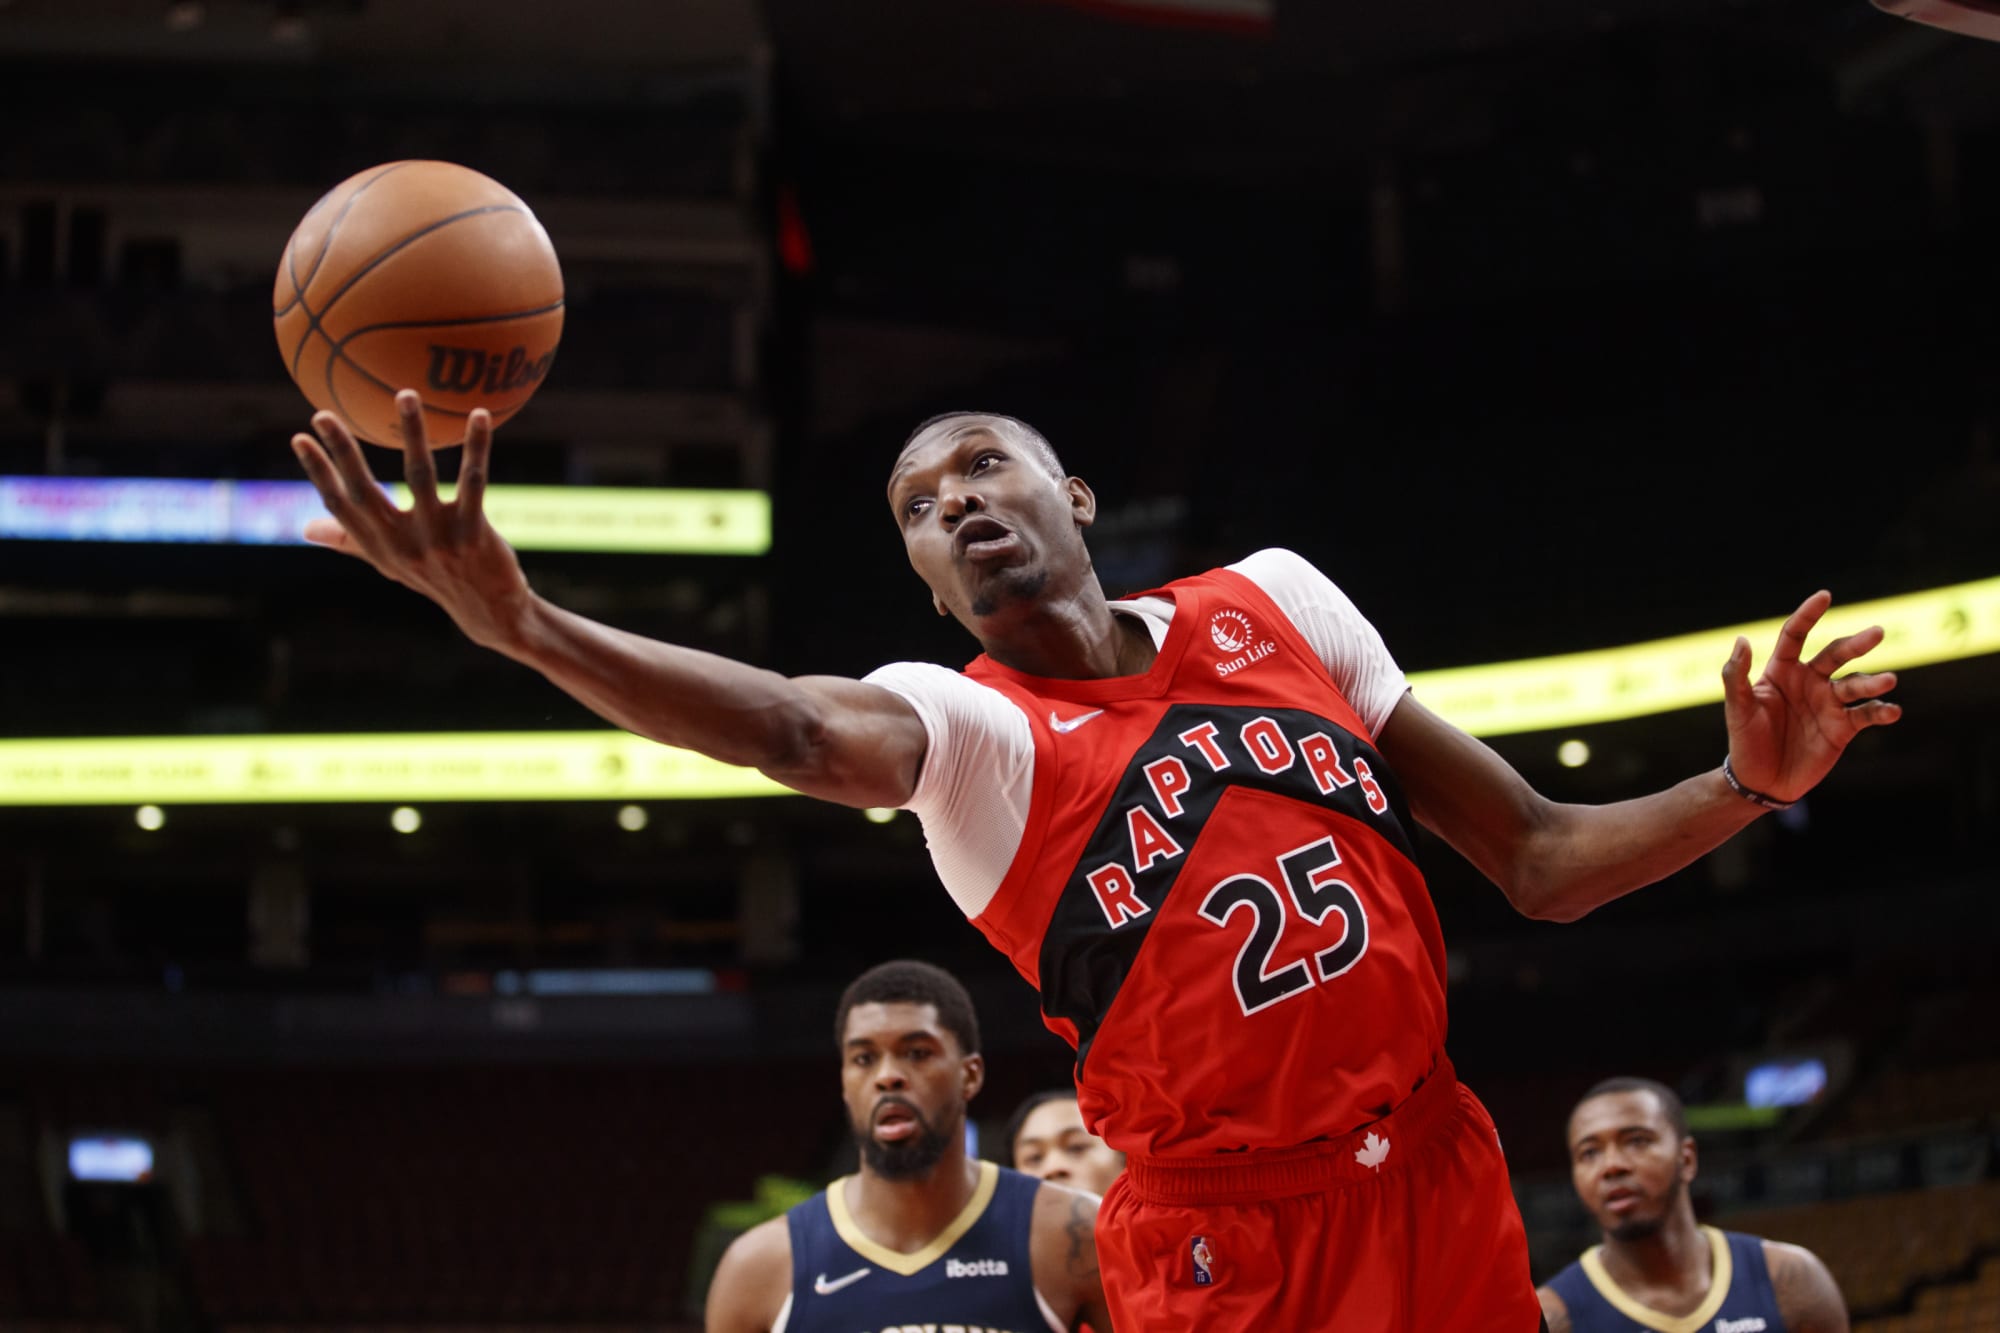 Raptors 905's latest success story, Chris Boucher's blistering but  abbreviated G League season ends with awards - The Athletic